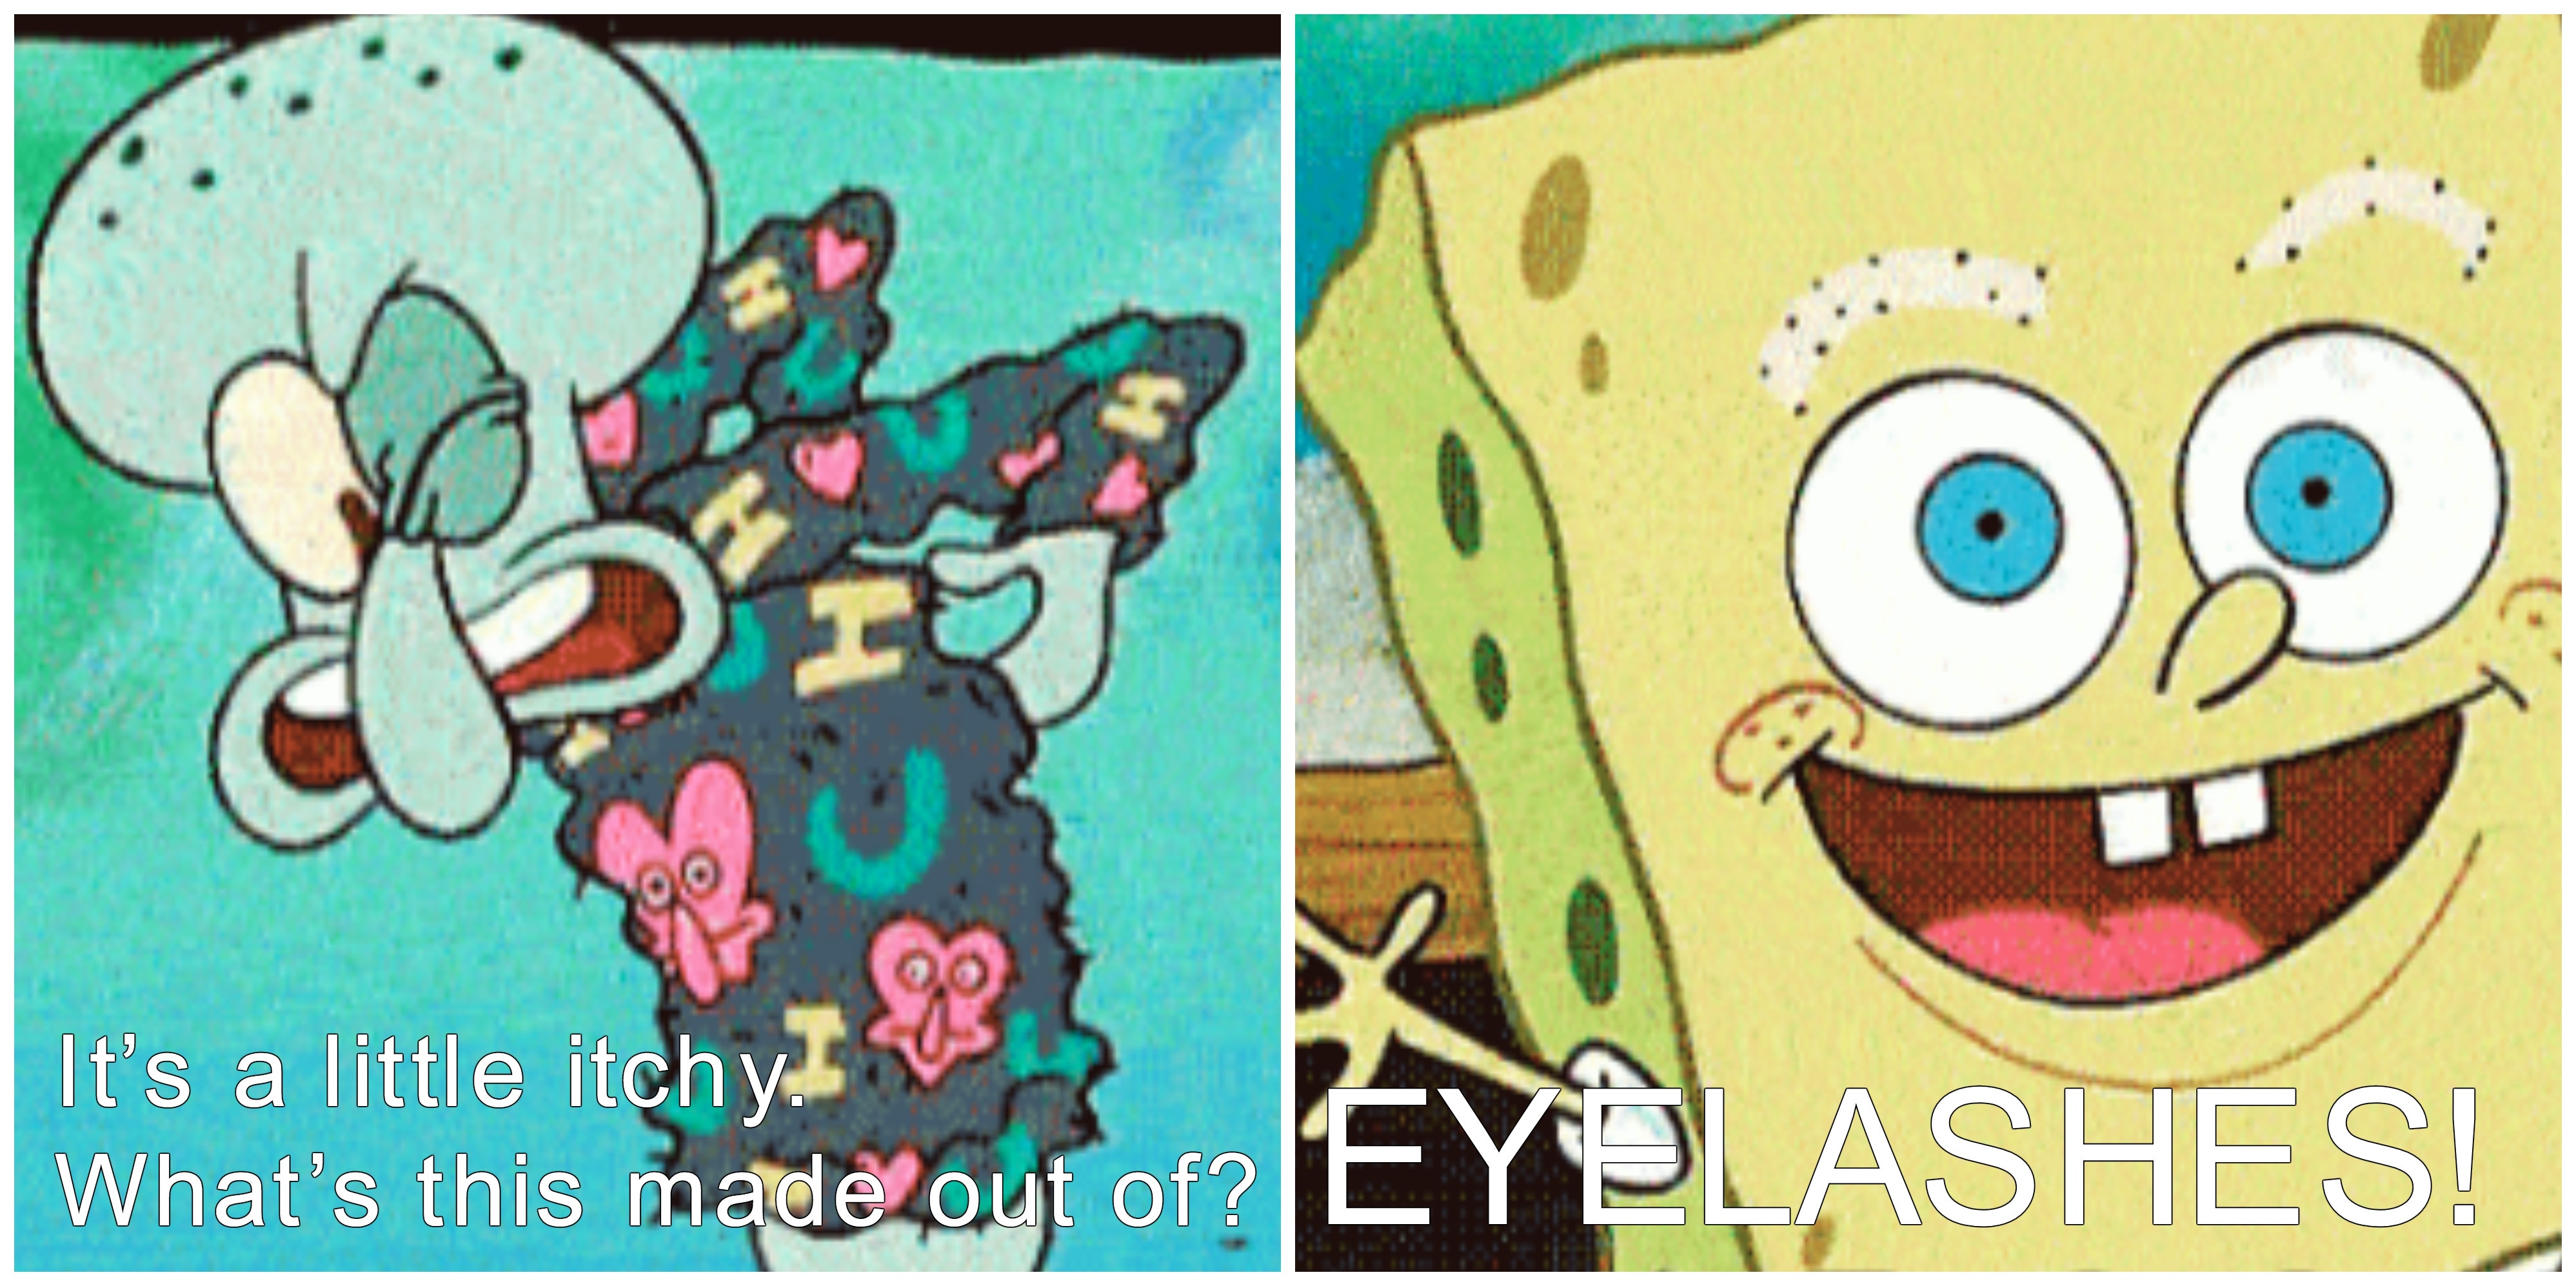 funniest spongebob quotes of all time